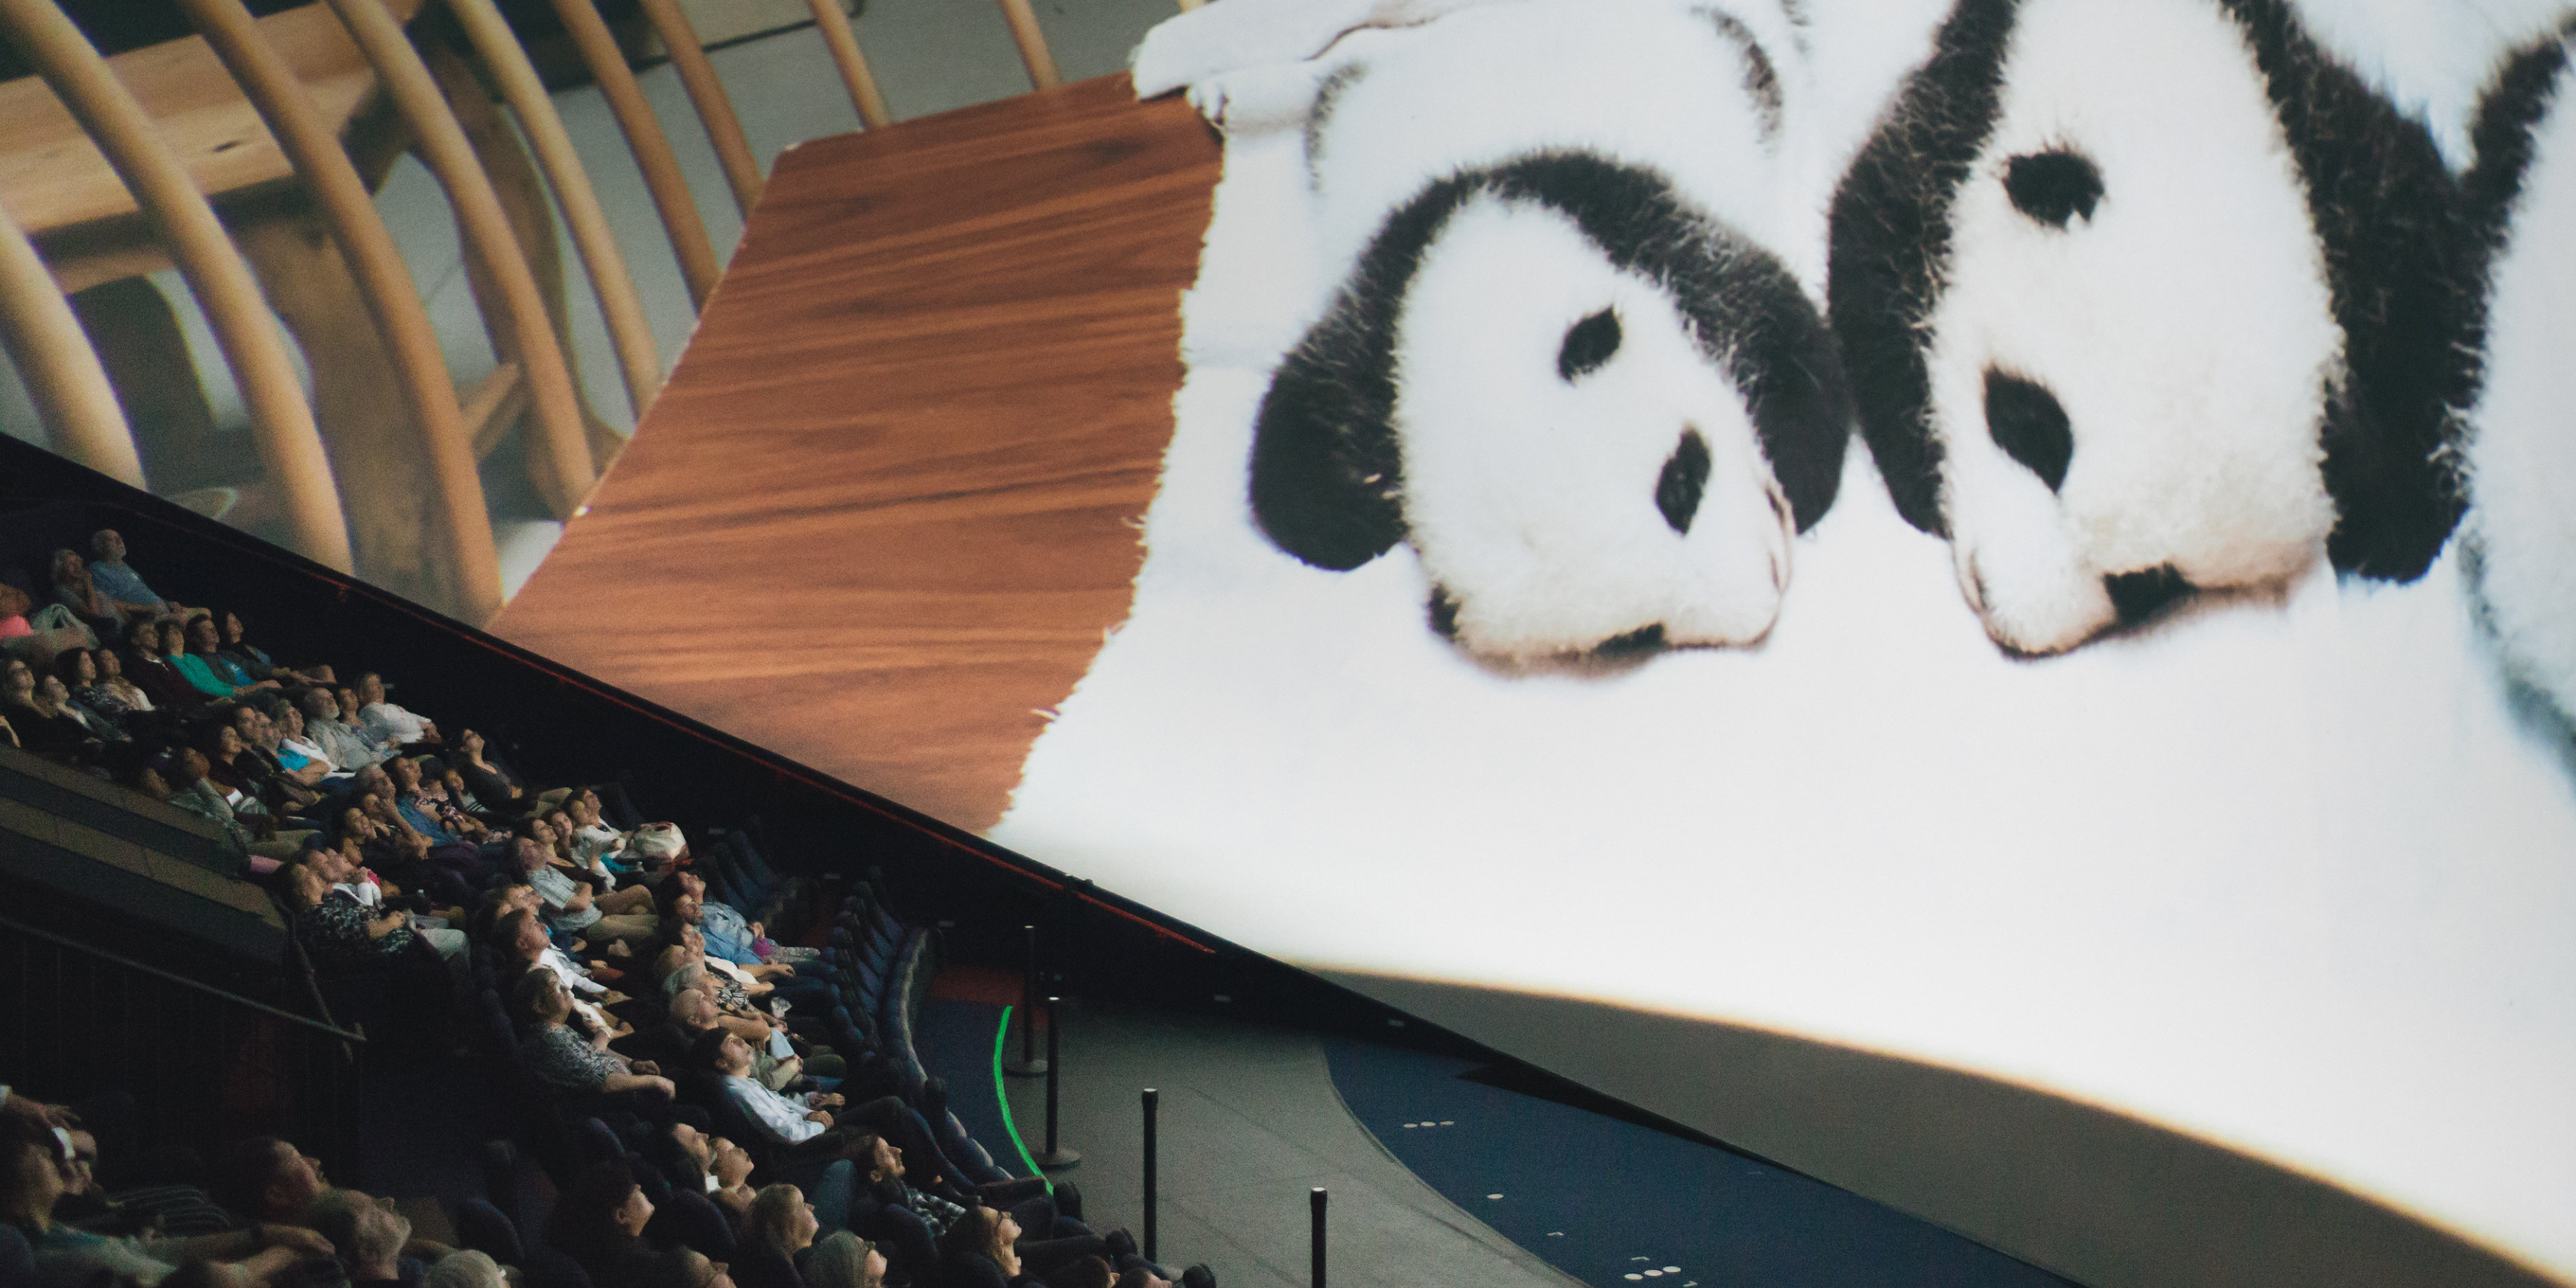 Photo inside of the Heikoff Giant Dome Theater. On the screen are two baby pandas.